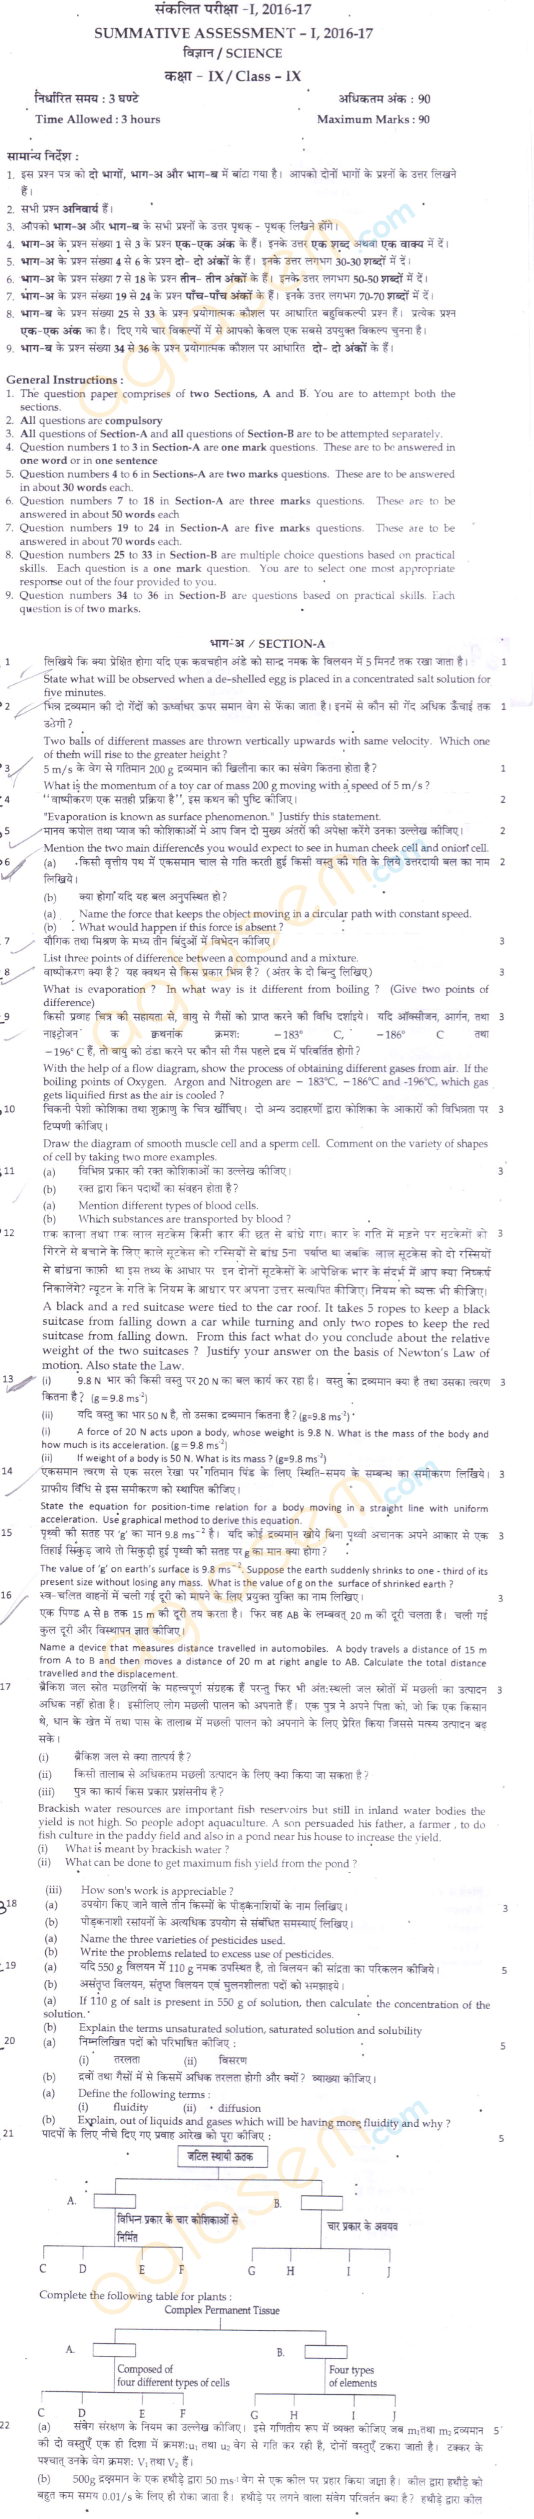 class 9 science case study mcq questions